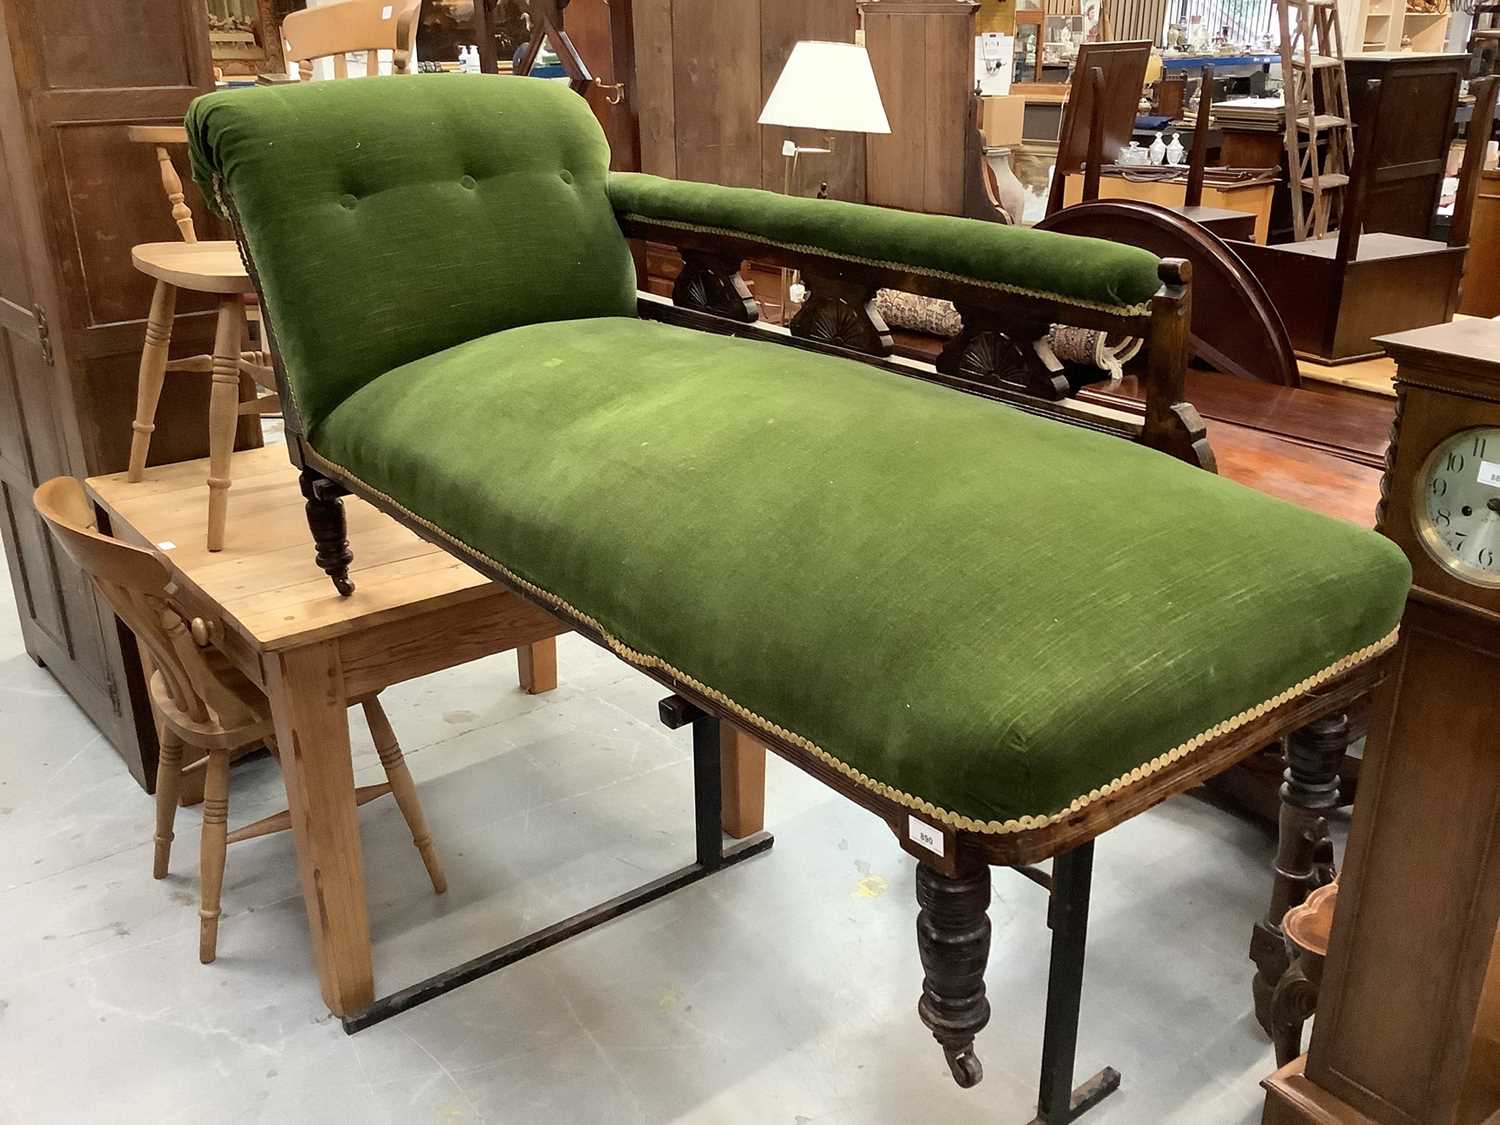 Lot 890 - Late Victorian chaise longue with green velvet upholstery